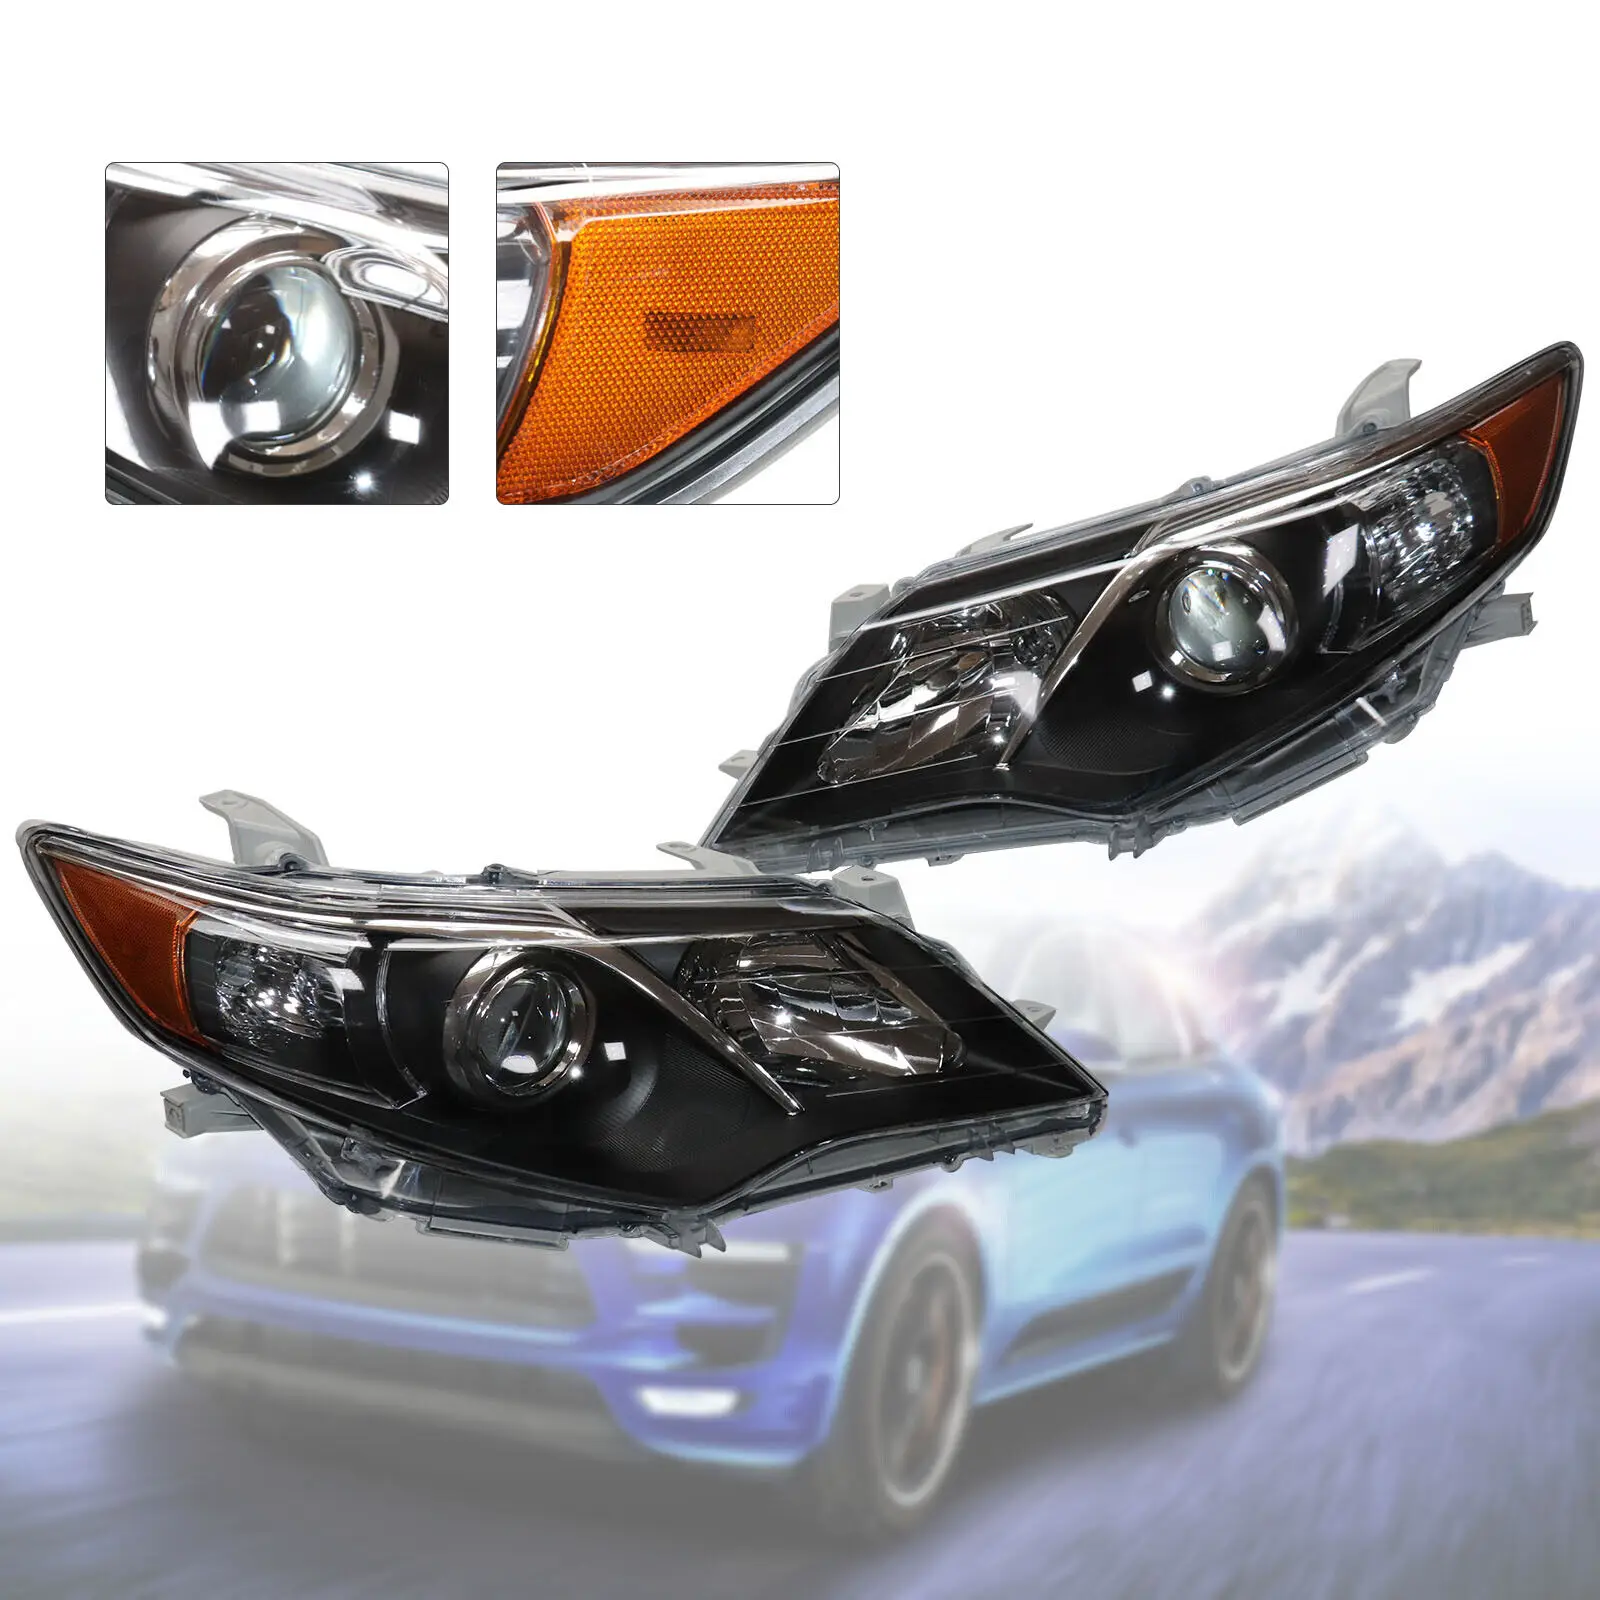 

Car Accessory Projector Headlights For Toyota Camry 2012 2013 2014 Headlamps Replacement Left&Right Light